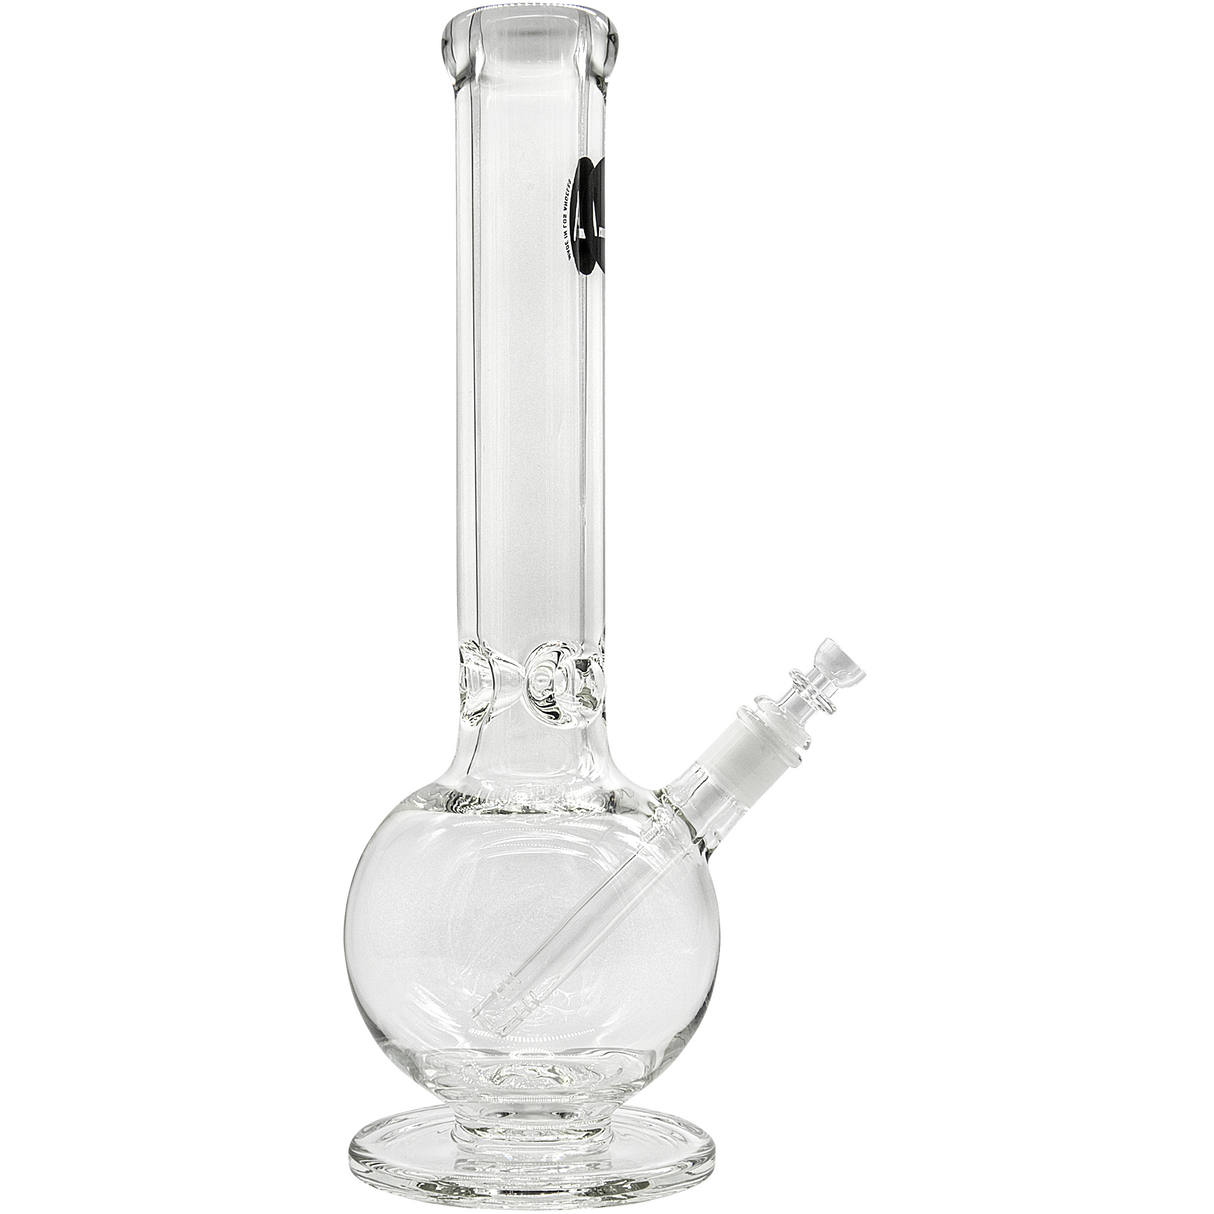 LA Pipes "Bazooka" 9mm Thick Glass Bong, 16"-18" Height, Heavy Wall, Front View